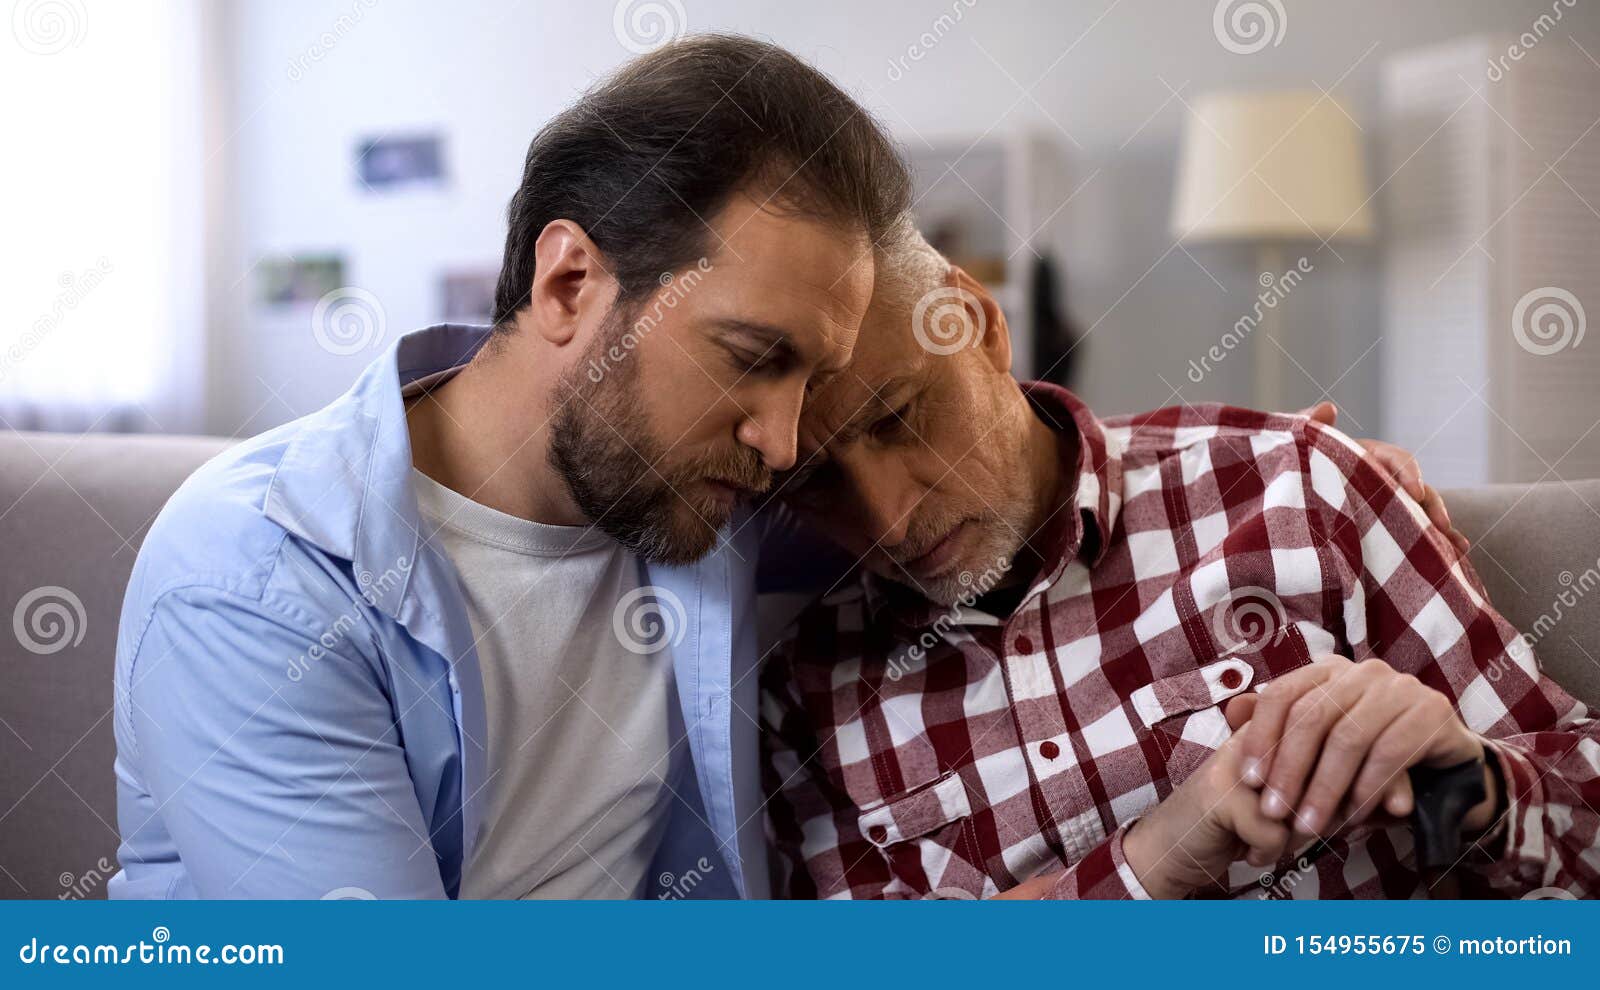 Young Man Hugging And Comforting Depressed Old Dad Suffering